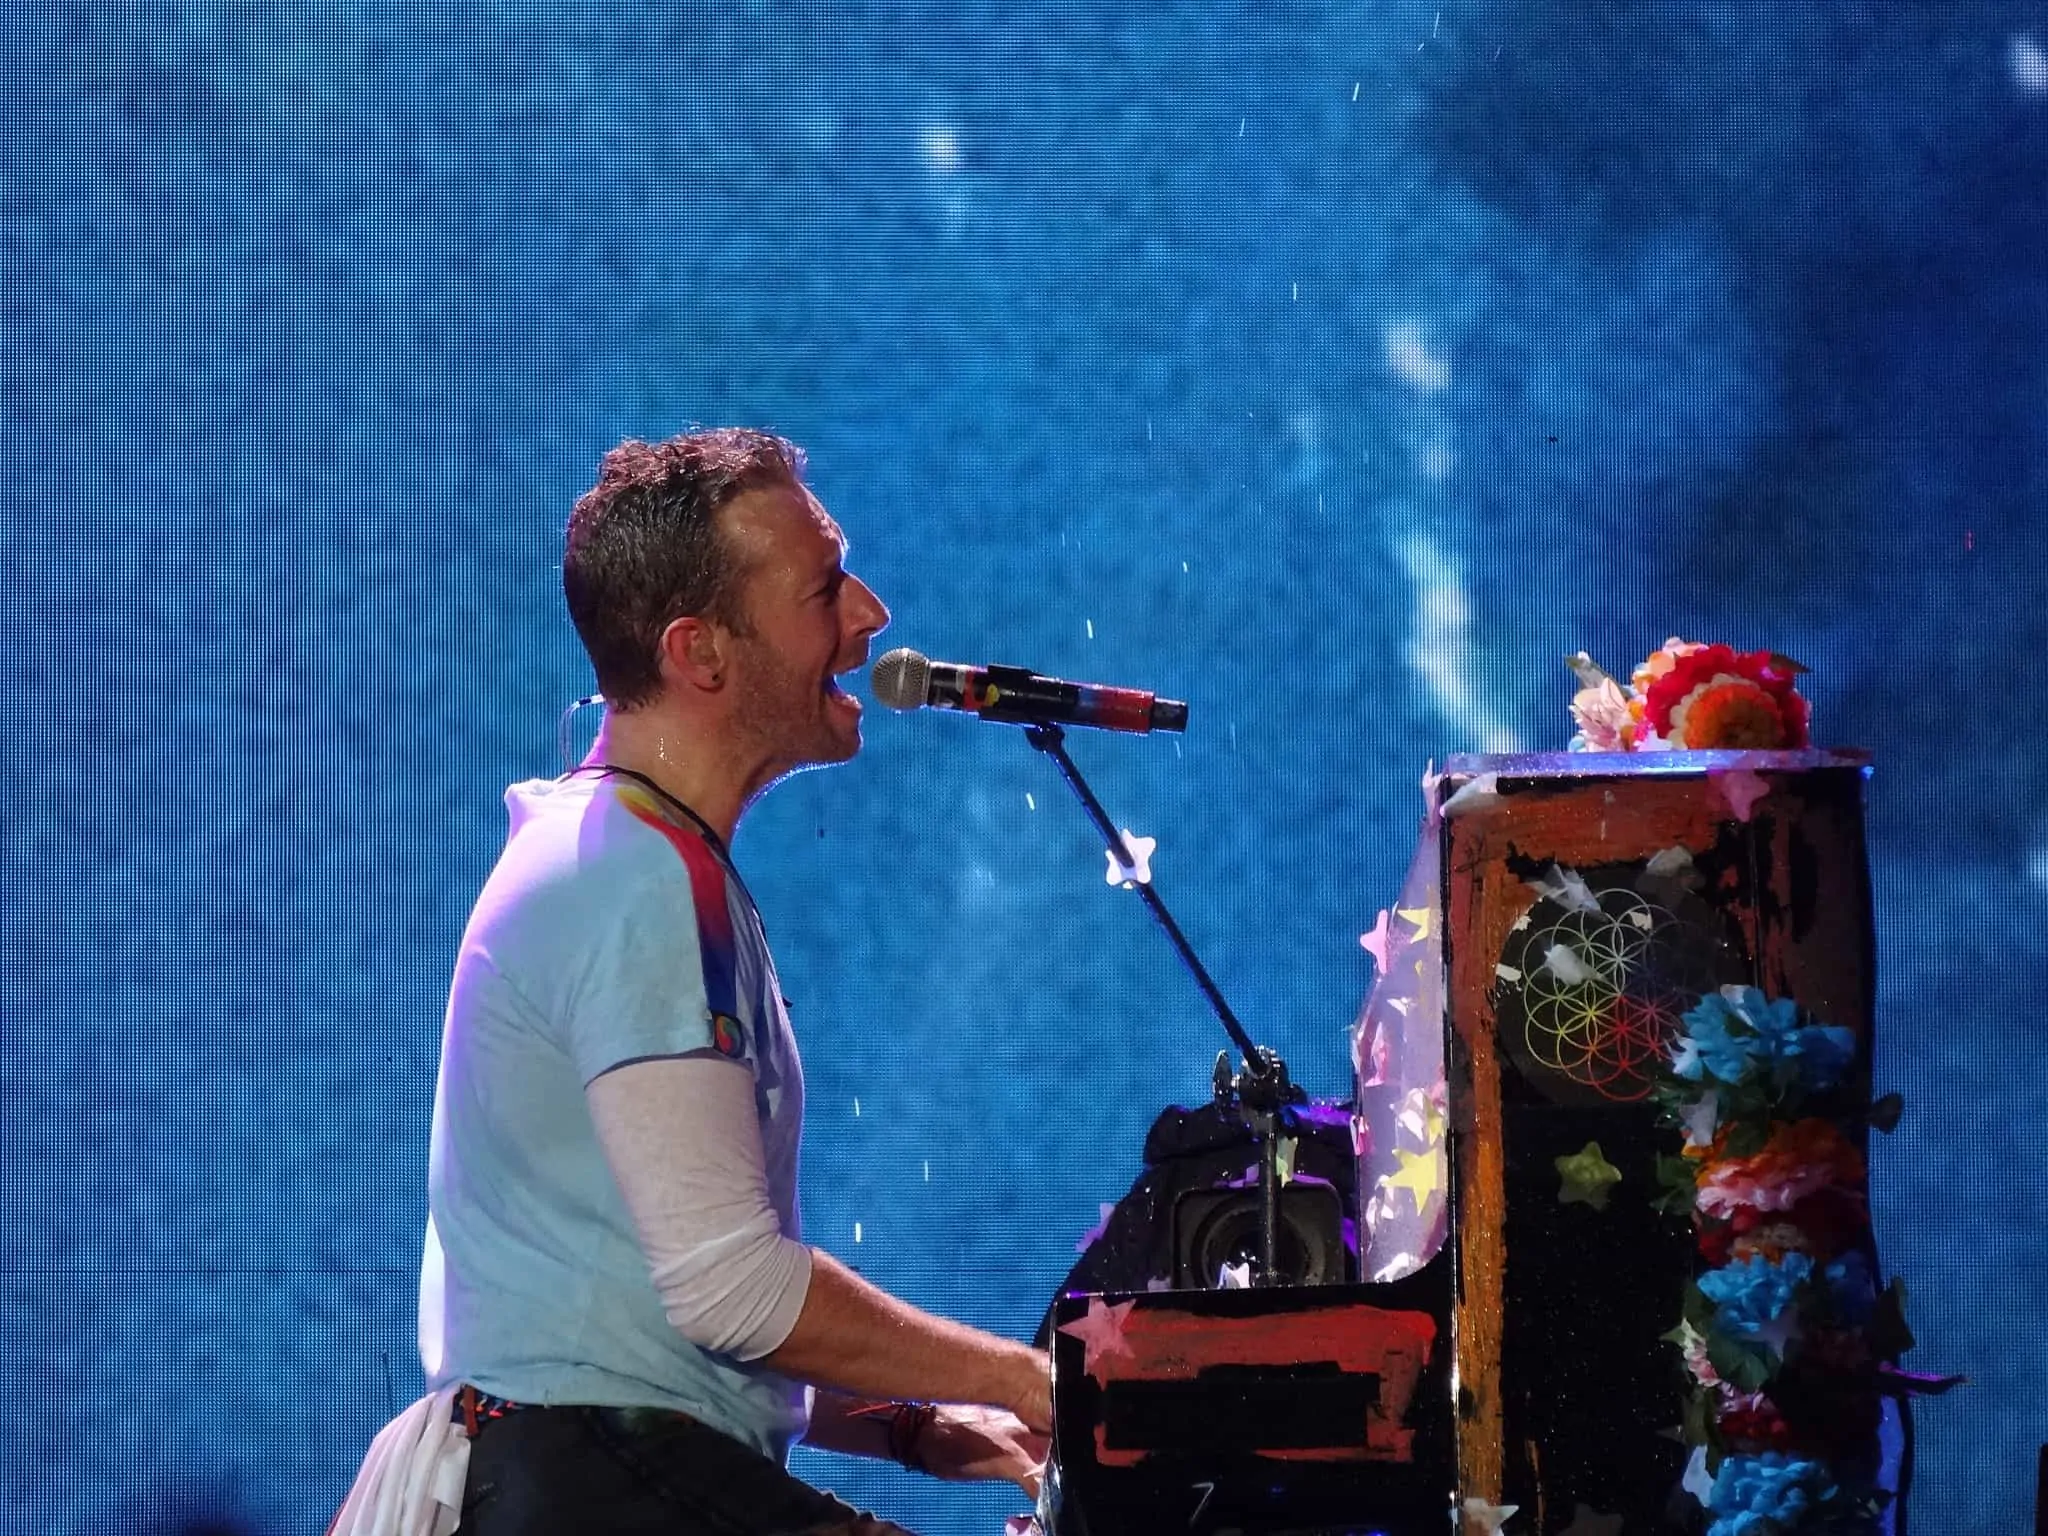 Chris martin playing piano and singing on stage